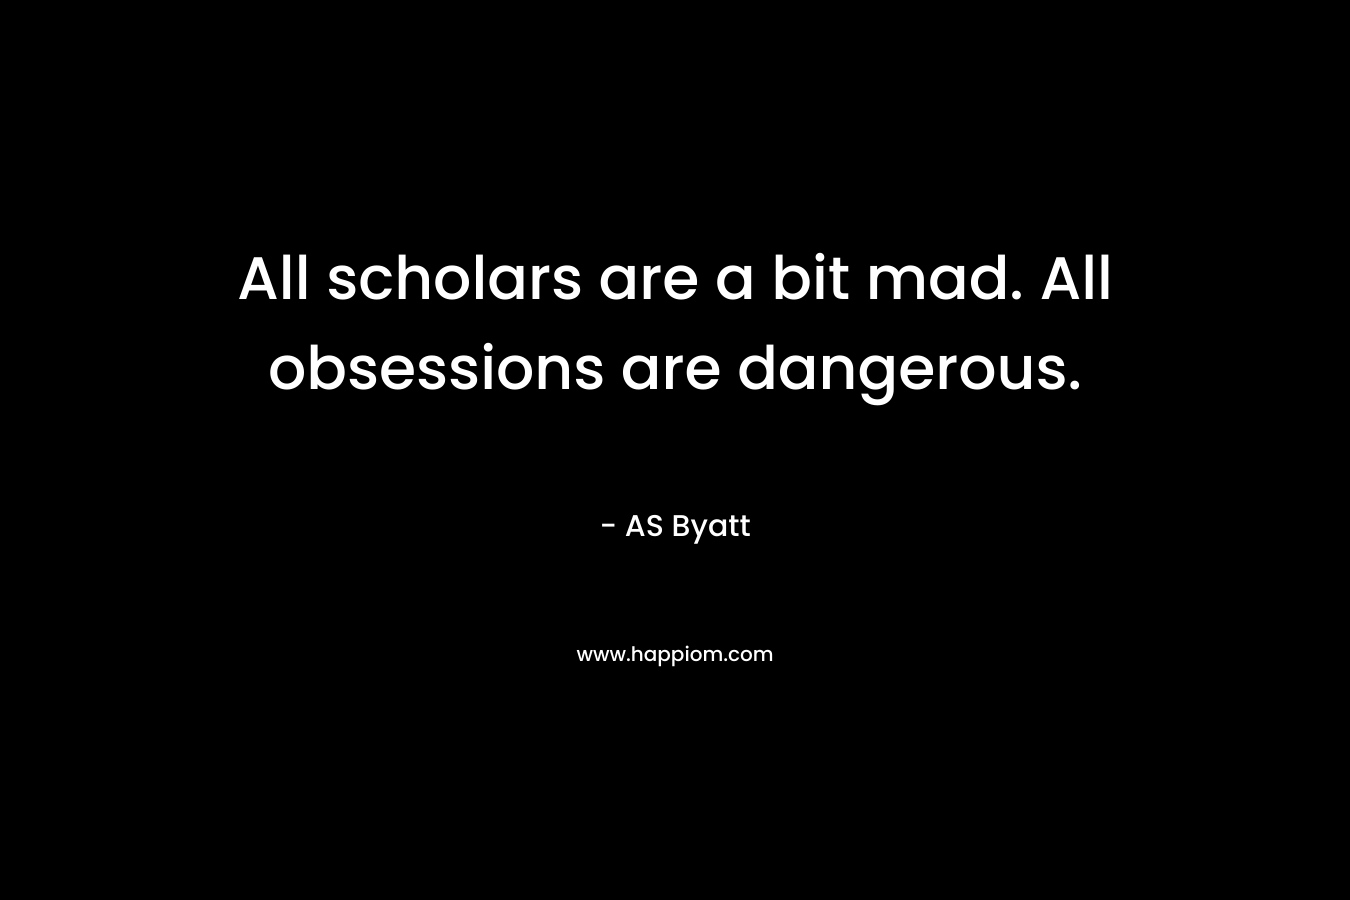 All scholars are a bit mad. All obsessions are dangerous. – AS Byatt